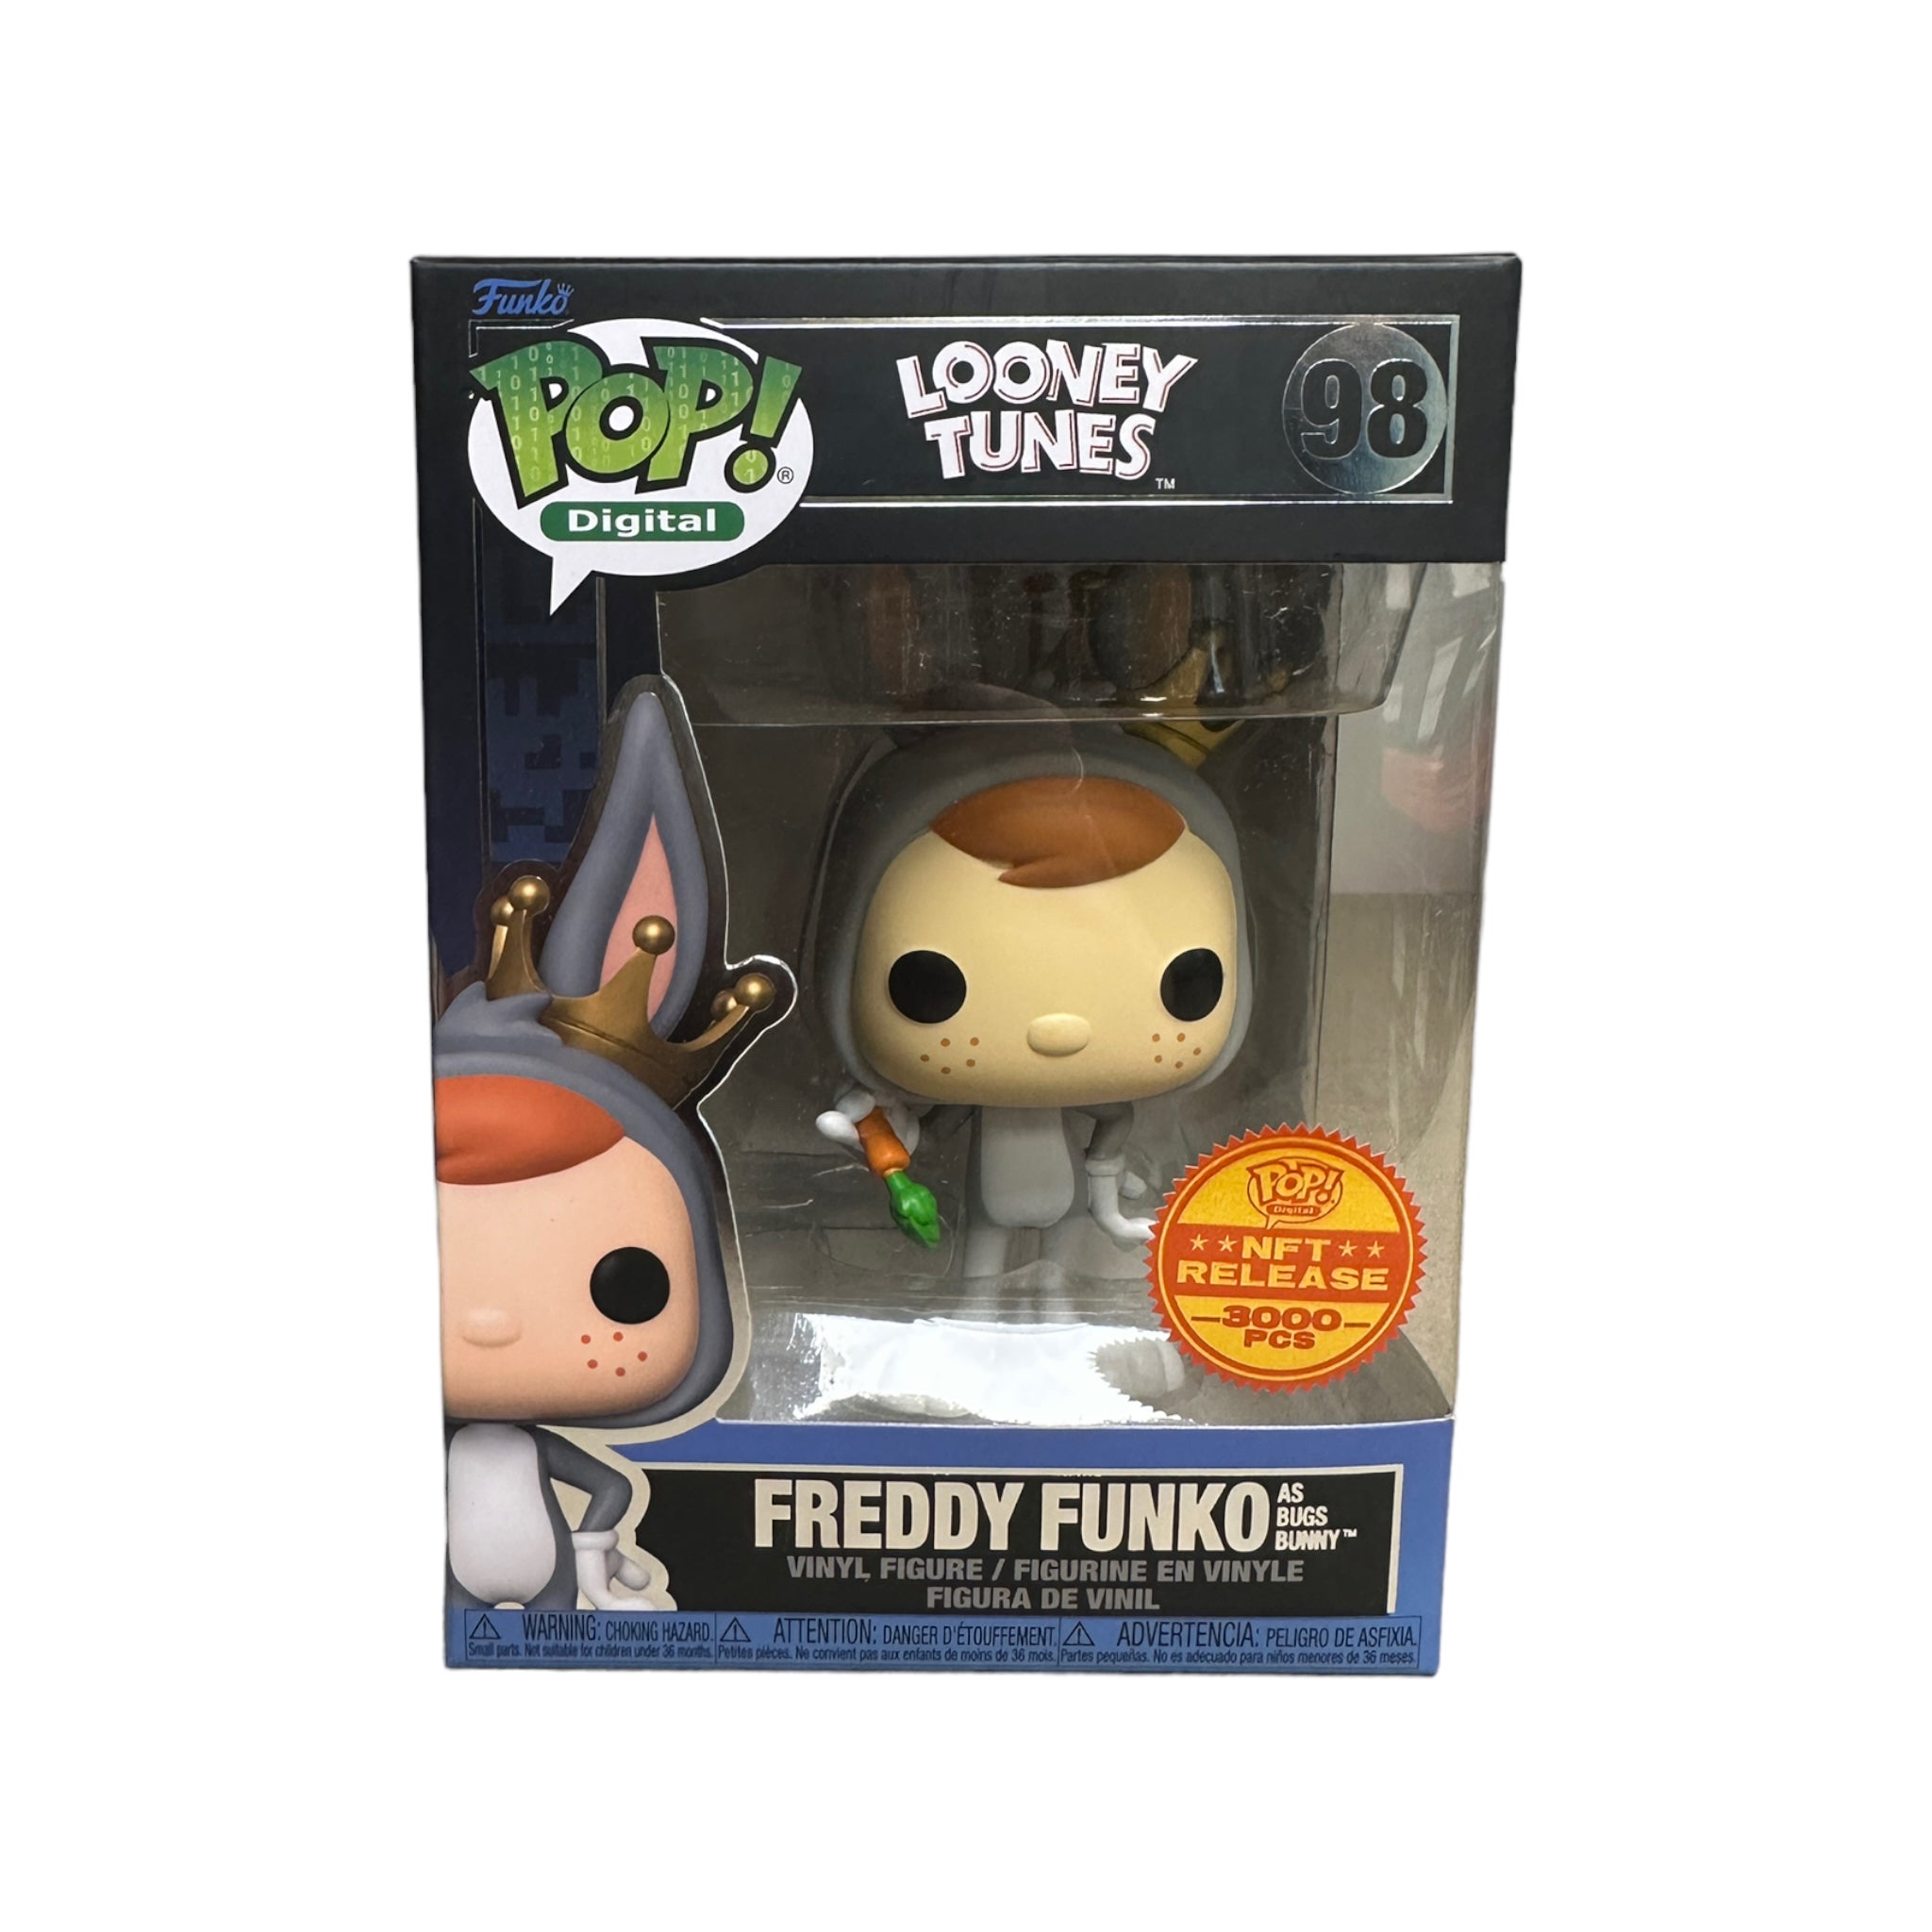 Freddy Funko as Bugs Bunny #98 Funko Pop! - Looney Tunes - NFT Release Exclusive LE3000 Pcs - Condition 9/10